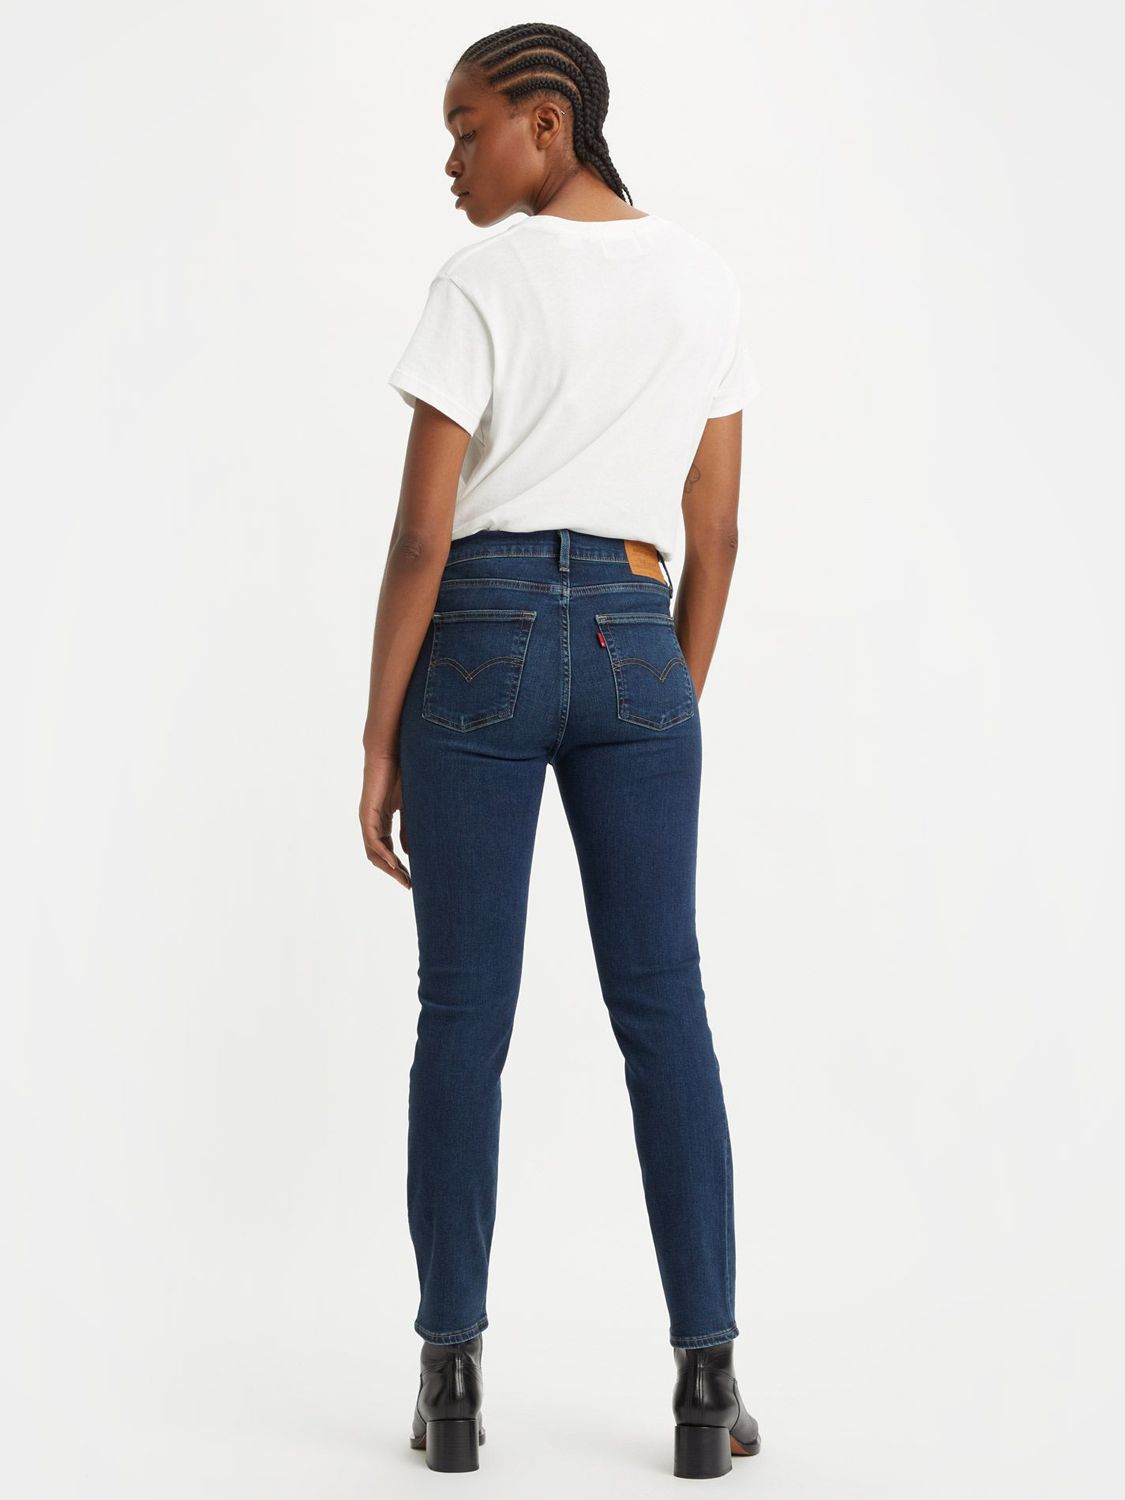 Levi's 724 High Rise Straight Cut Jeans, Blue Swell at John Lewis & Partners